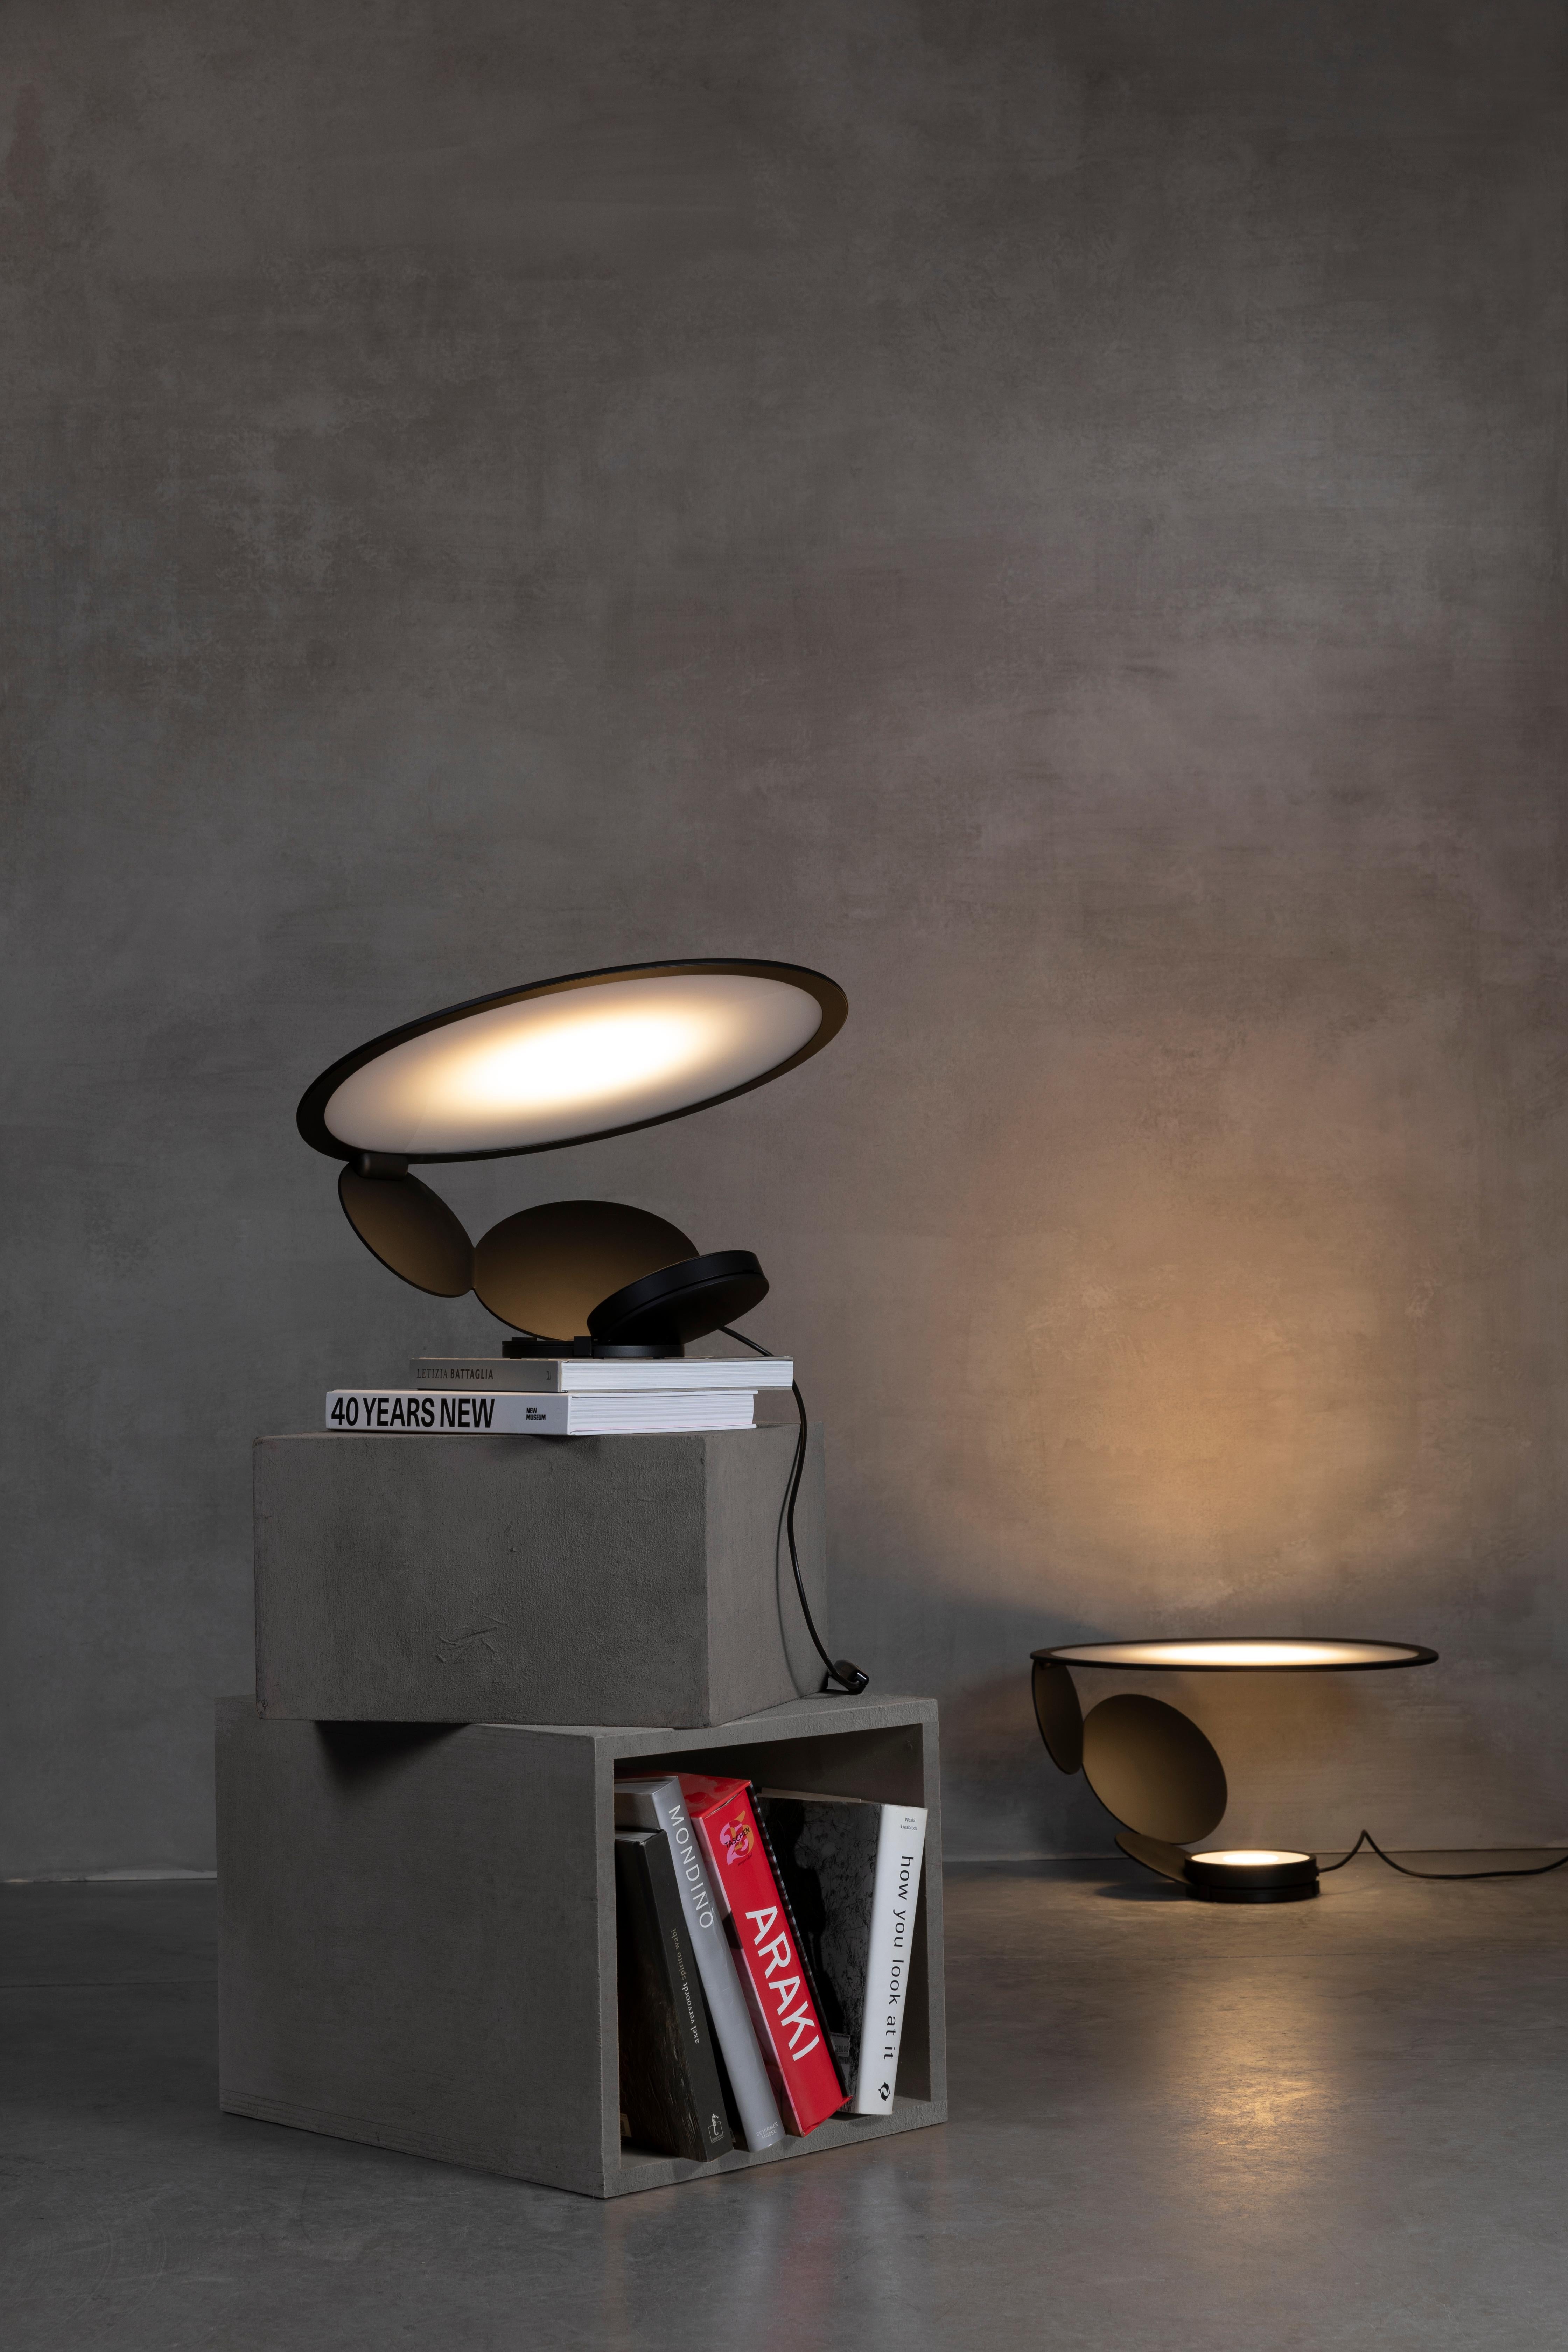 Winner of a “Gooddesign” award 2019-2020 for the lighting category, cut is the result of a long design process between Axolight and Timo Ripatti, aimed at the design of an adjustable lamp, that can be positioned on three points and never glares.